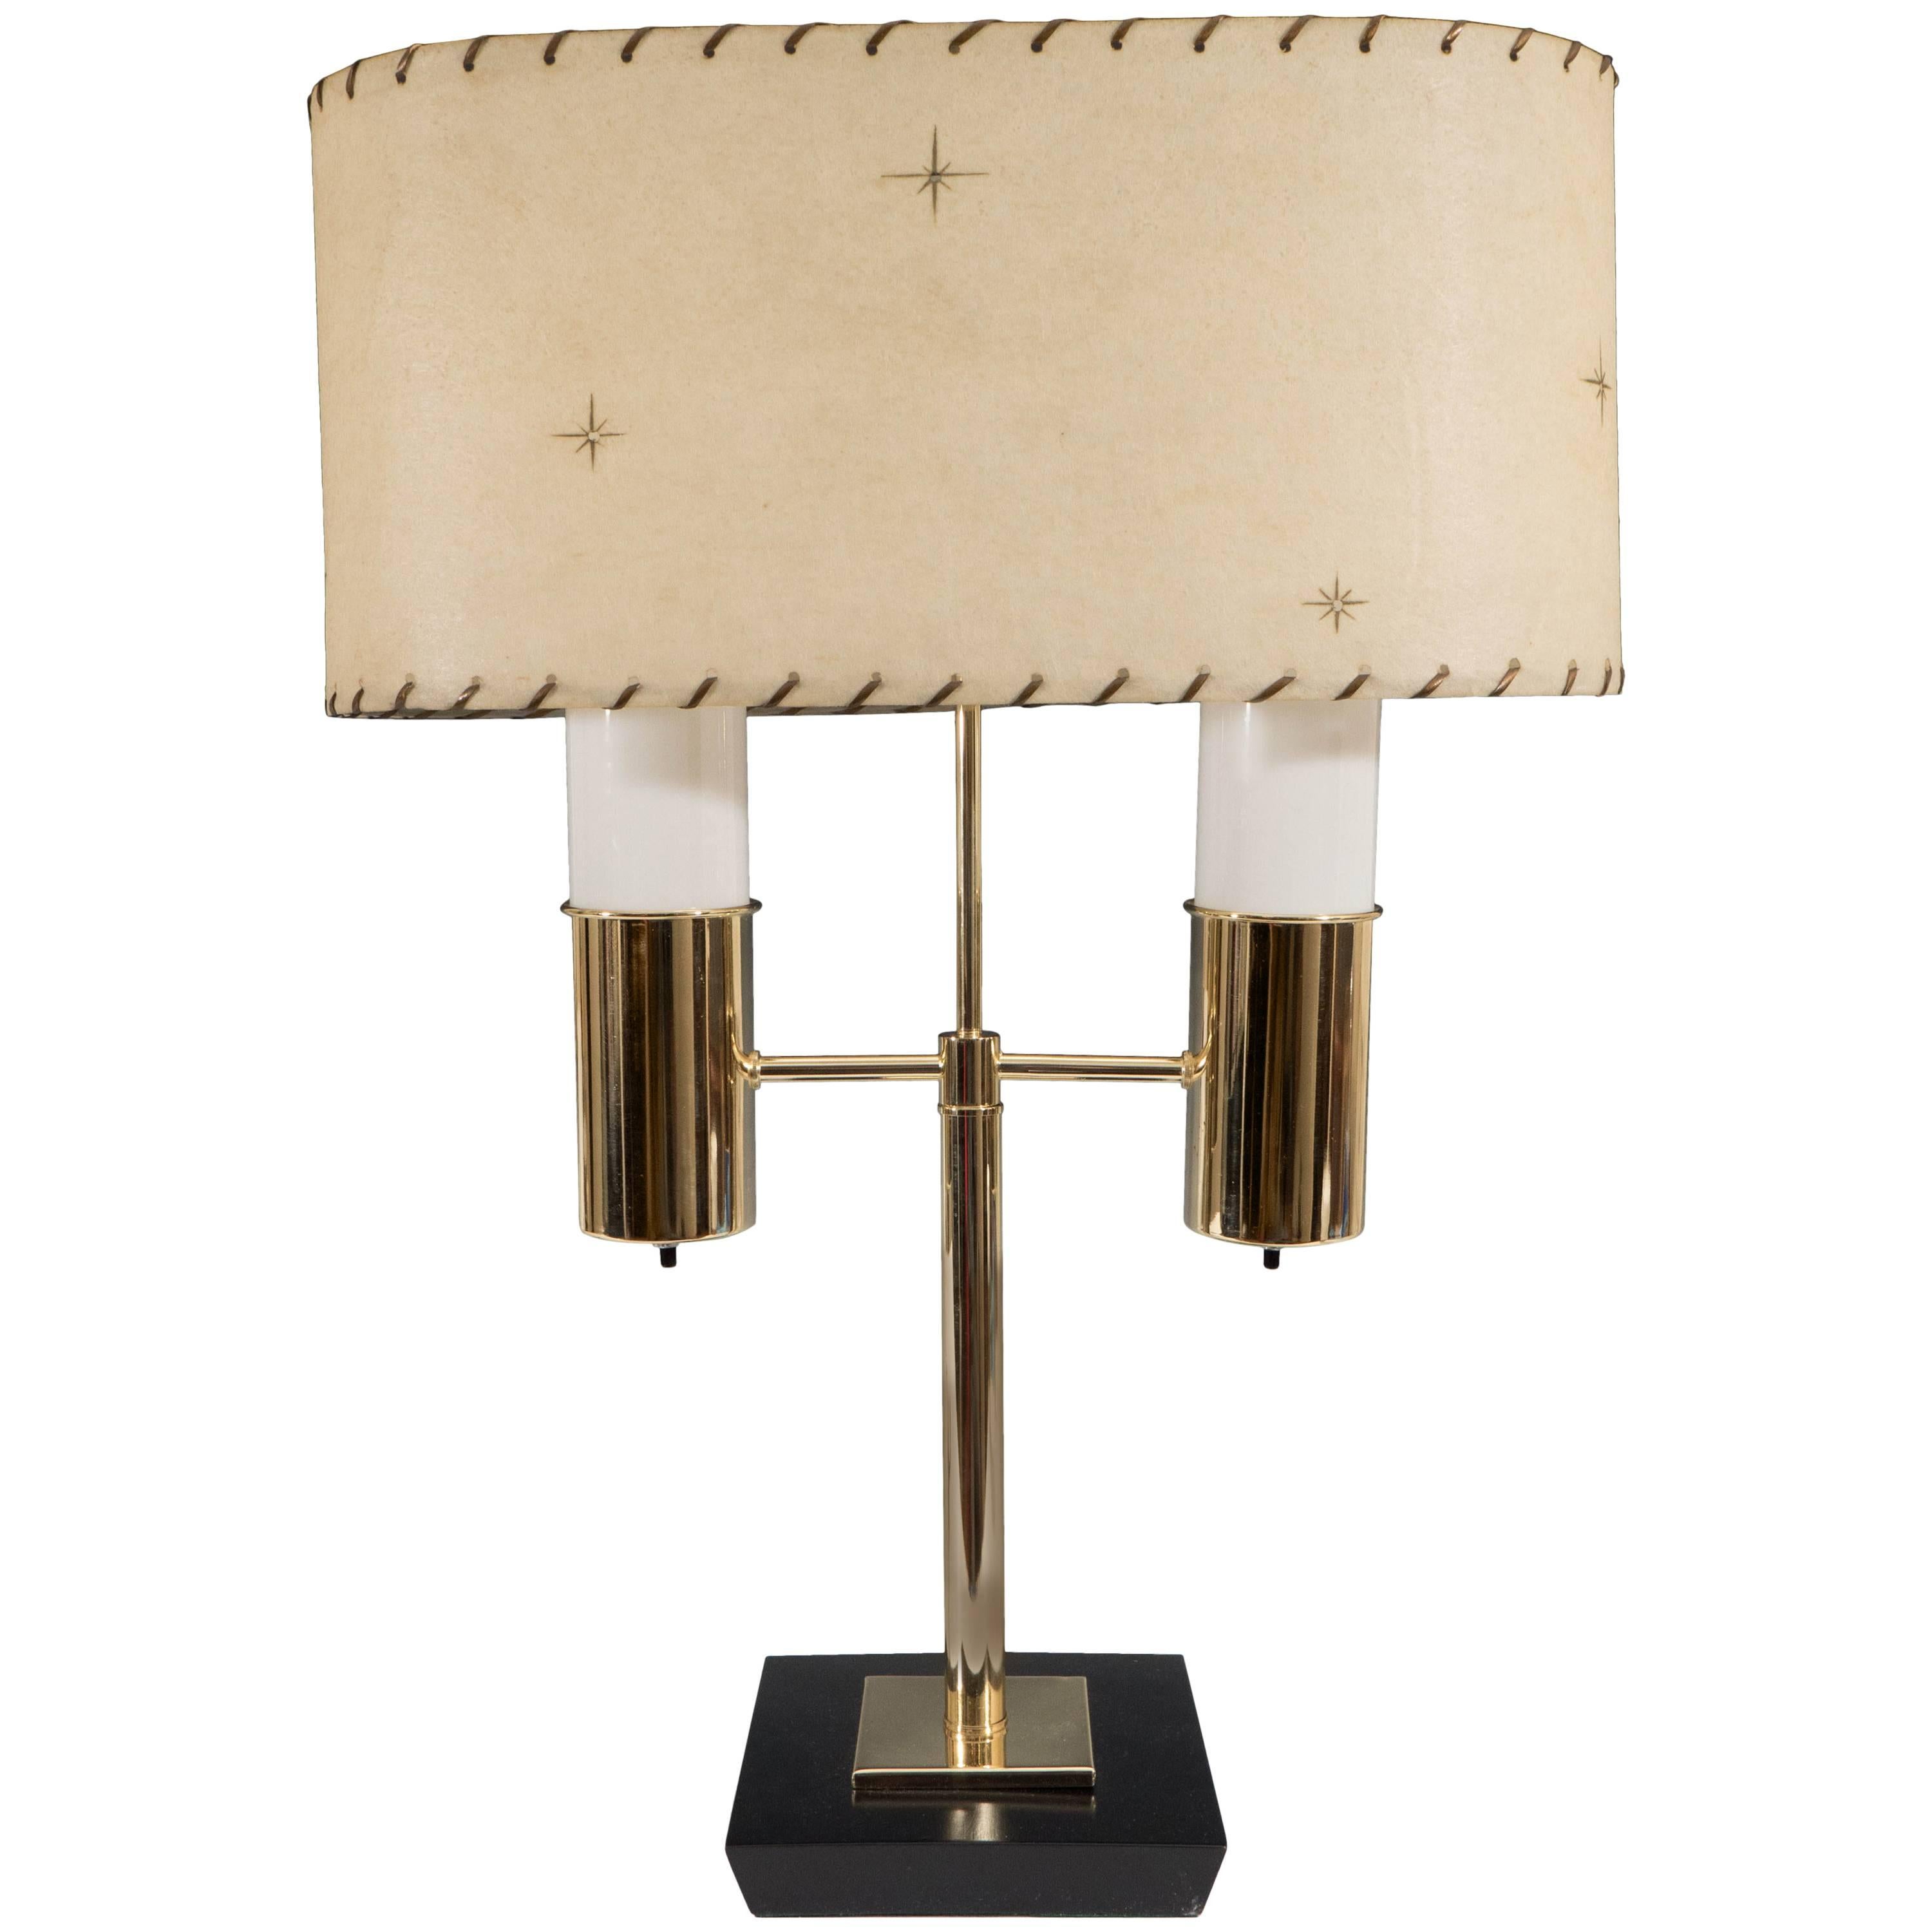 Rare Dual Light Table Lamp with Milk Glass Adornments & Parchment Shade